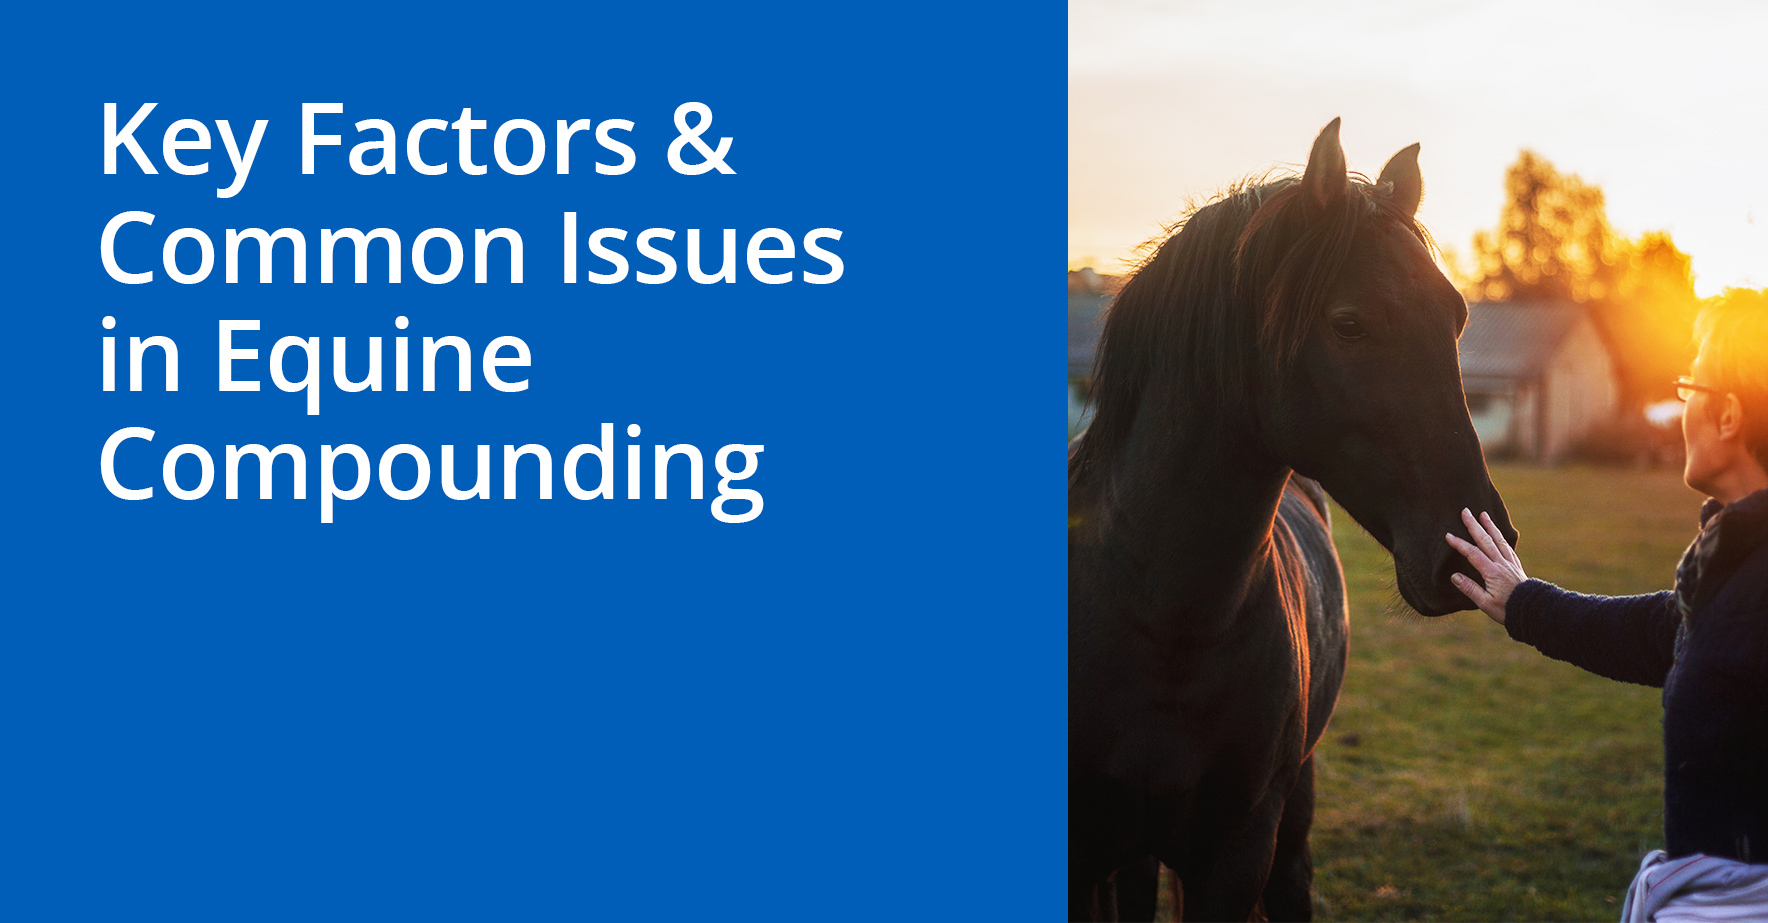 key_factors_and_common_issues_in_equine_compounding.jpg.